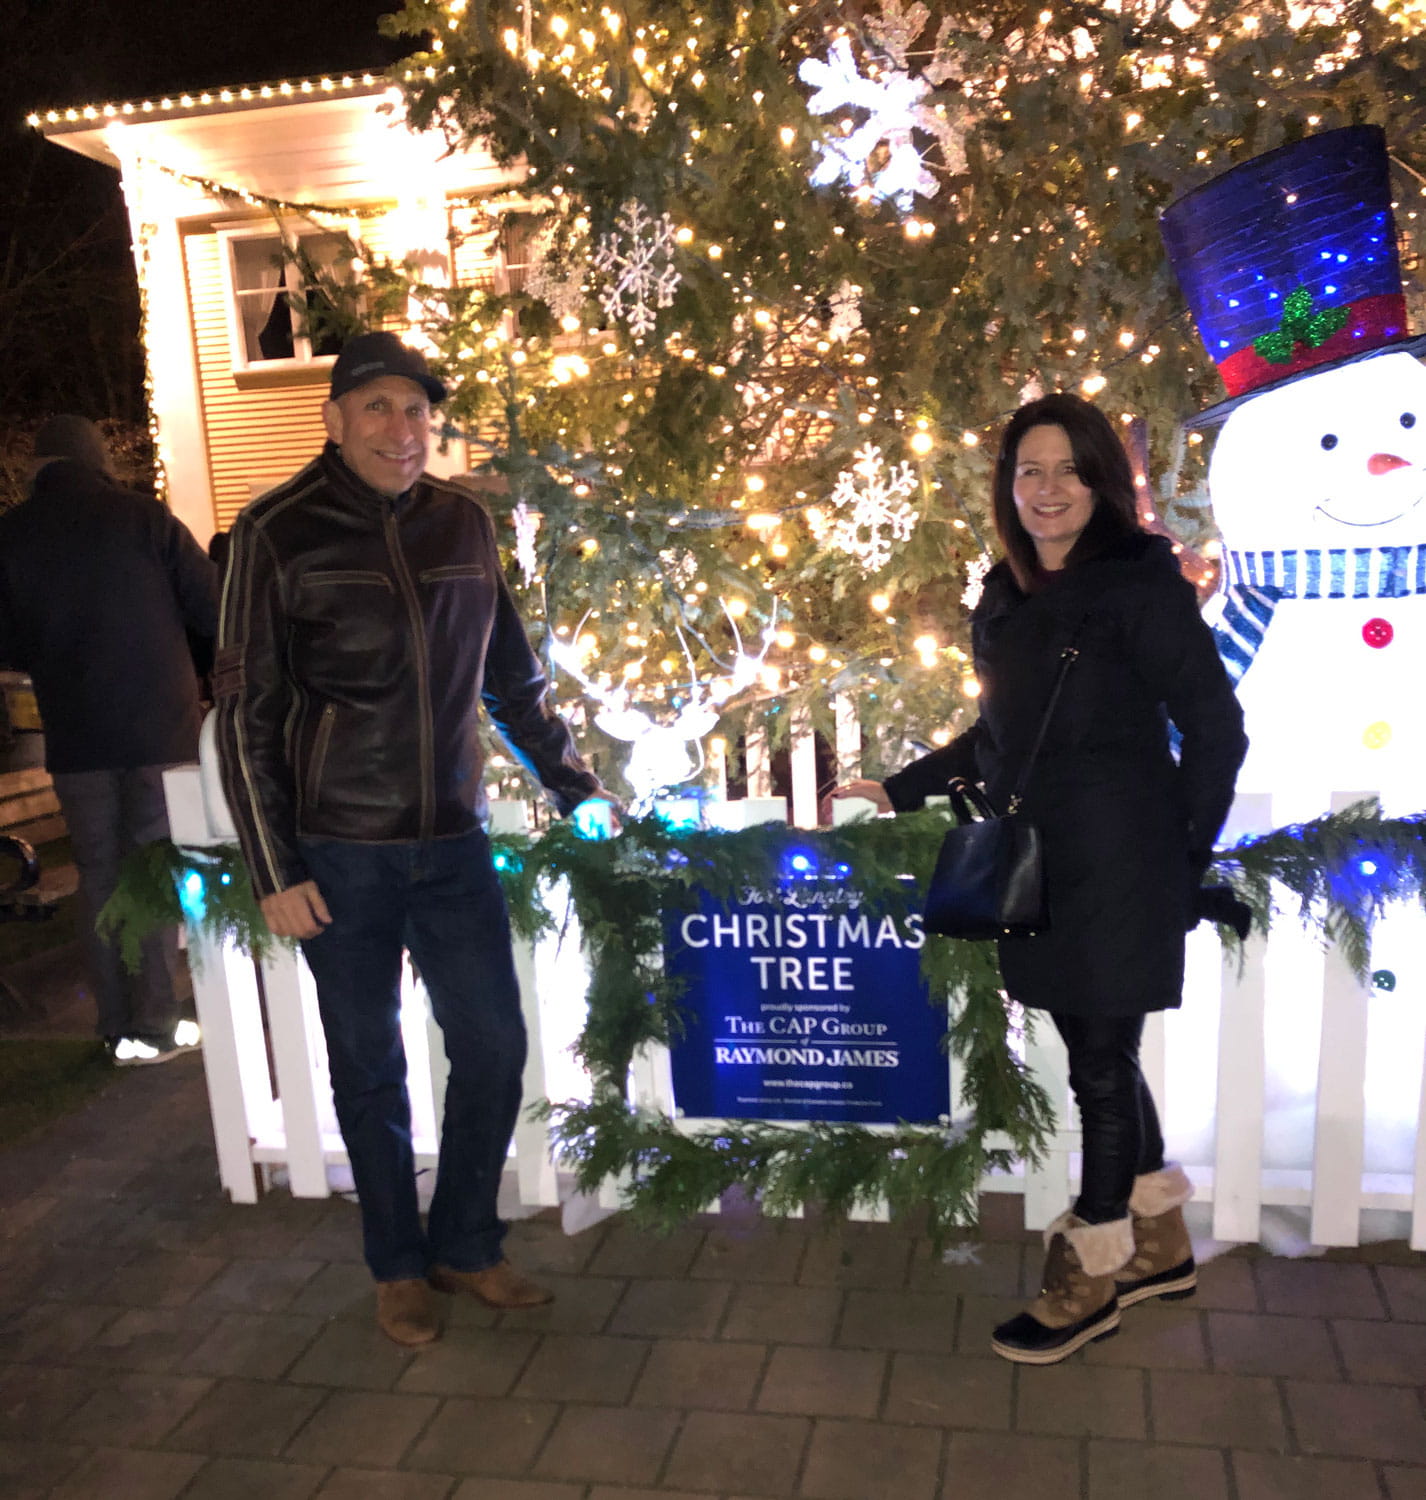 Two people in front of a Christmas tree